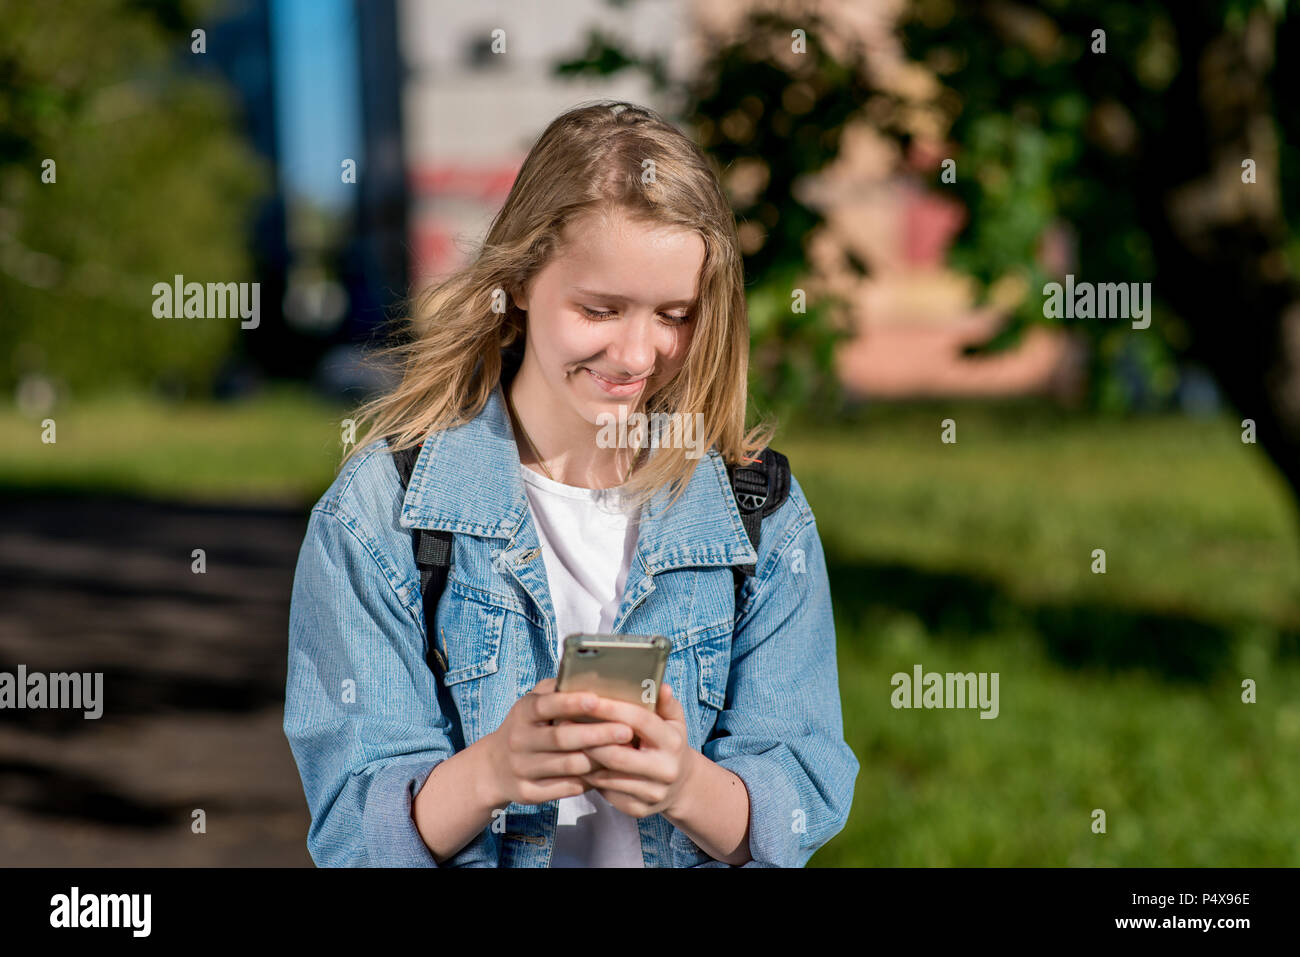 Little girl is blonde. Schoolgirl in summer after school. In his hands holds a smartphone. Smiles happily. Writes messages on social networks. Joyful rest after the institute. Stock Photo